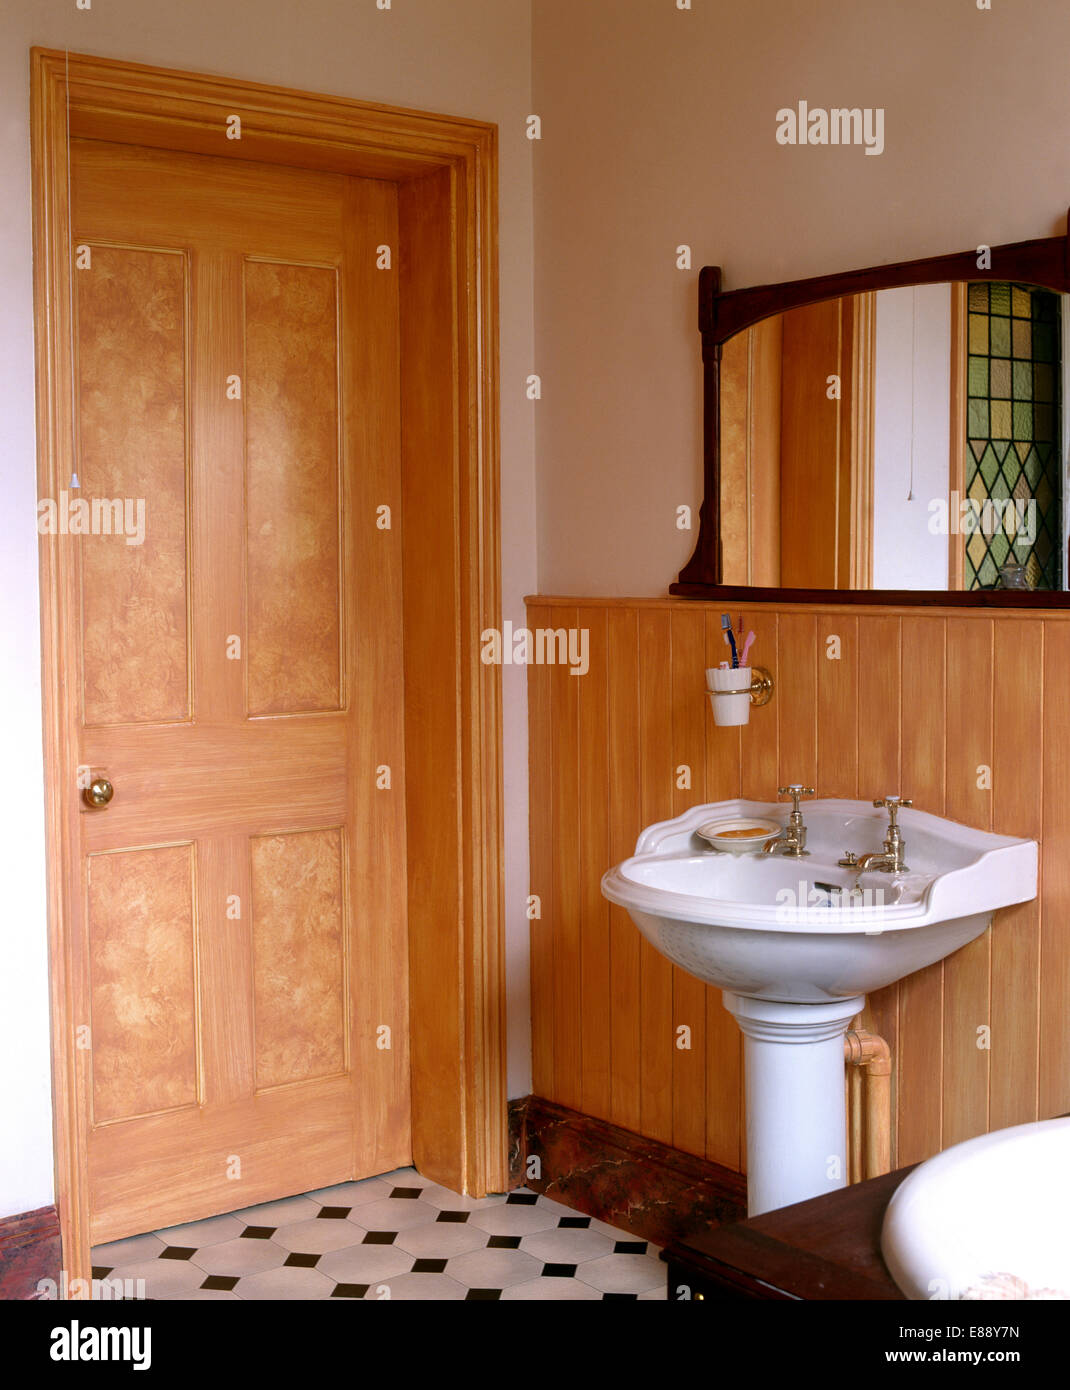 Newly renovated bathroom with tongue+groove dado panelling Stock Photo